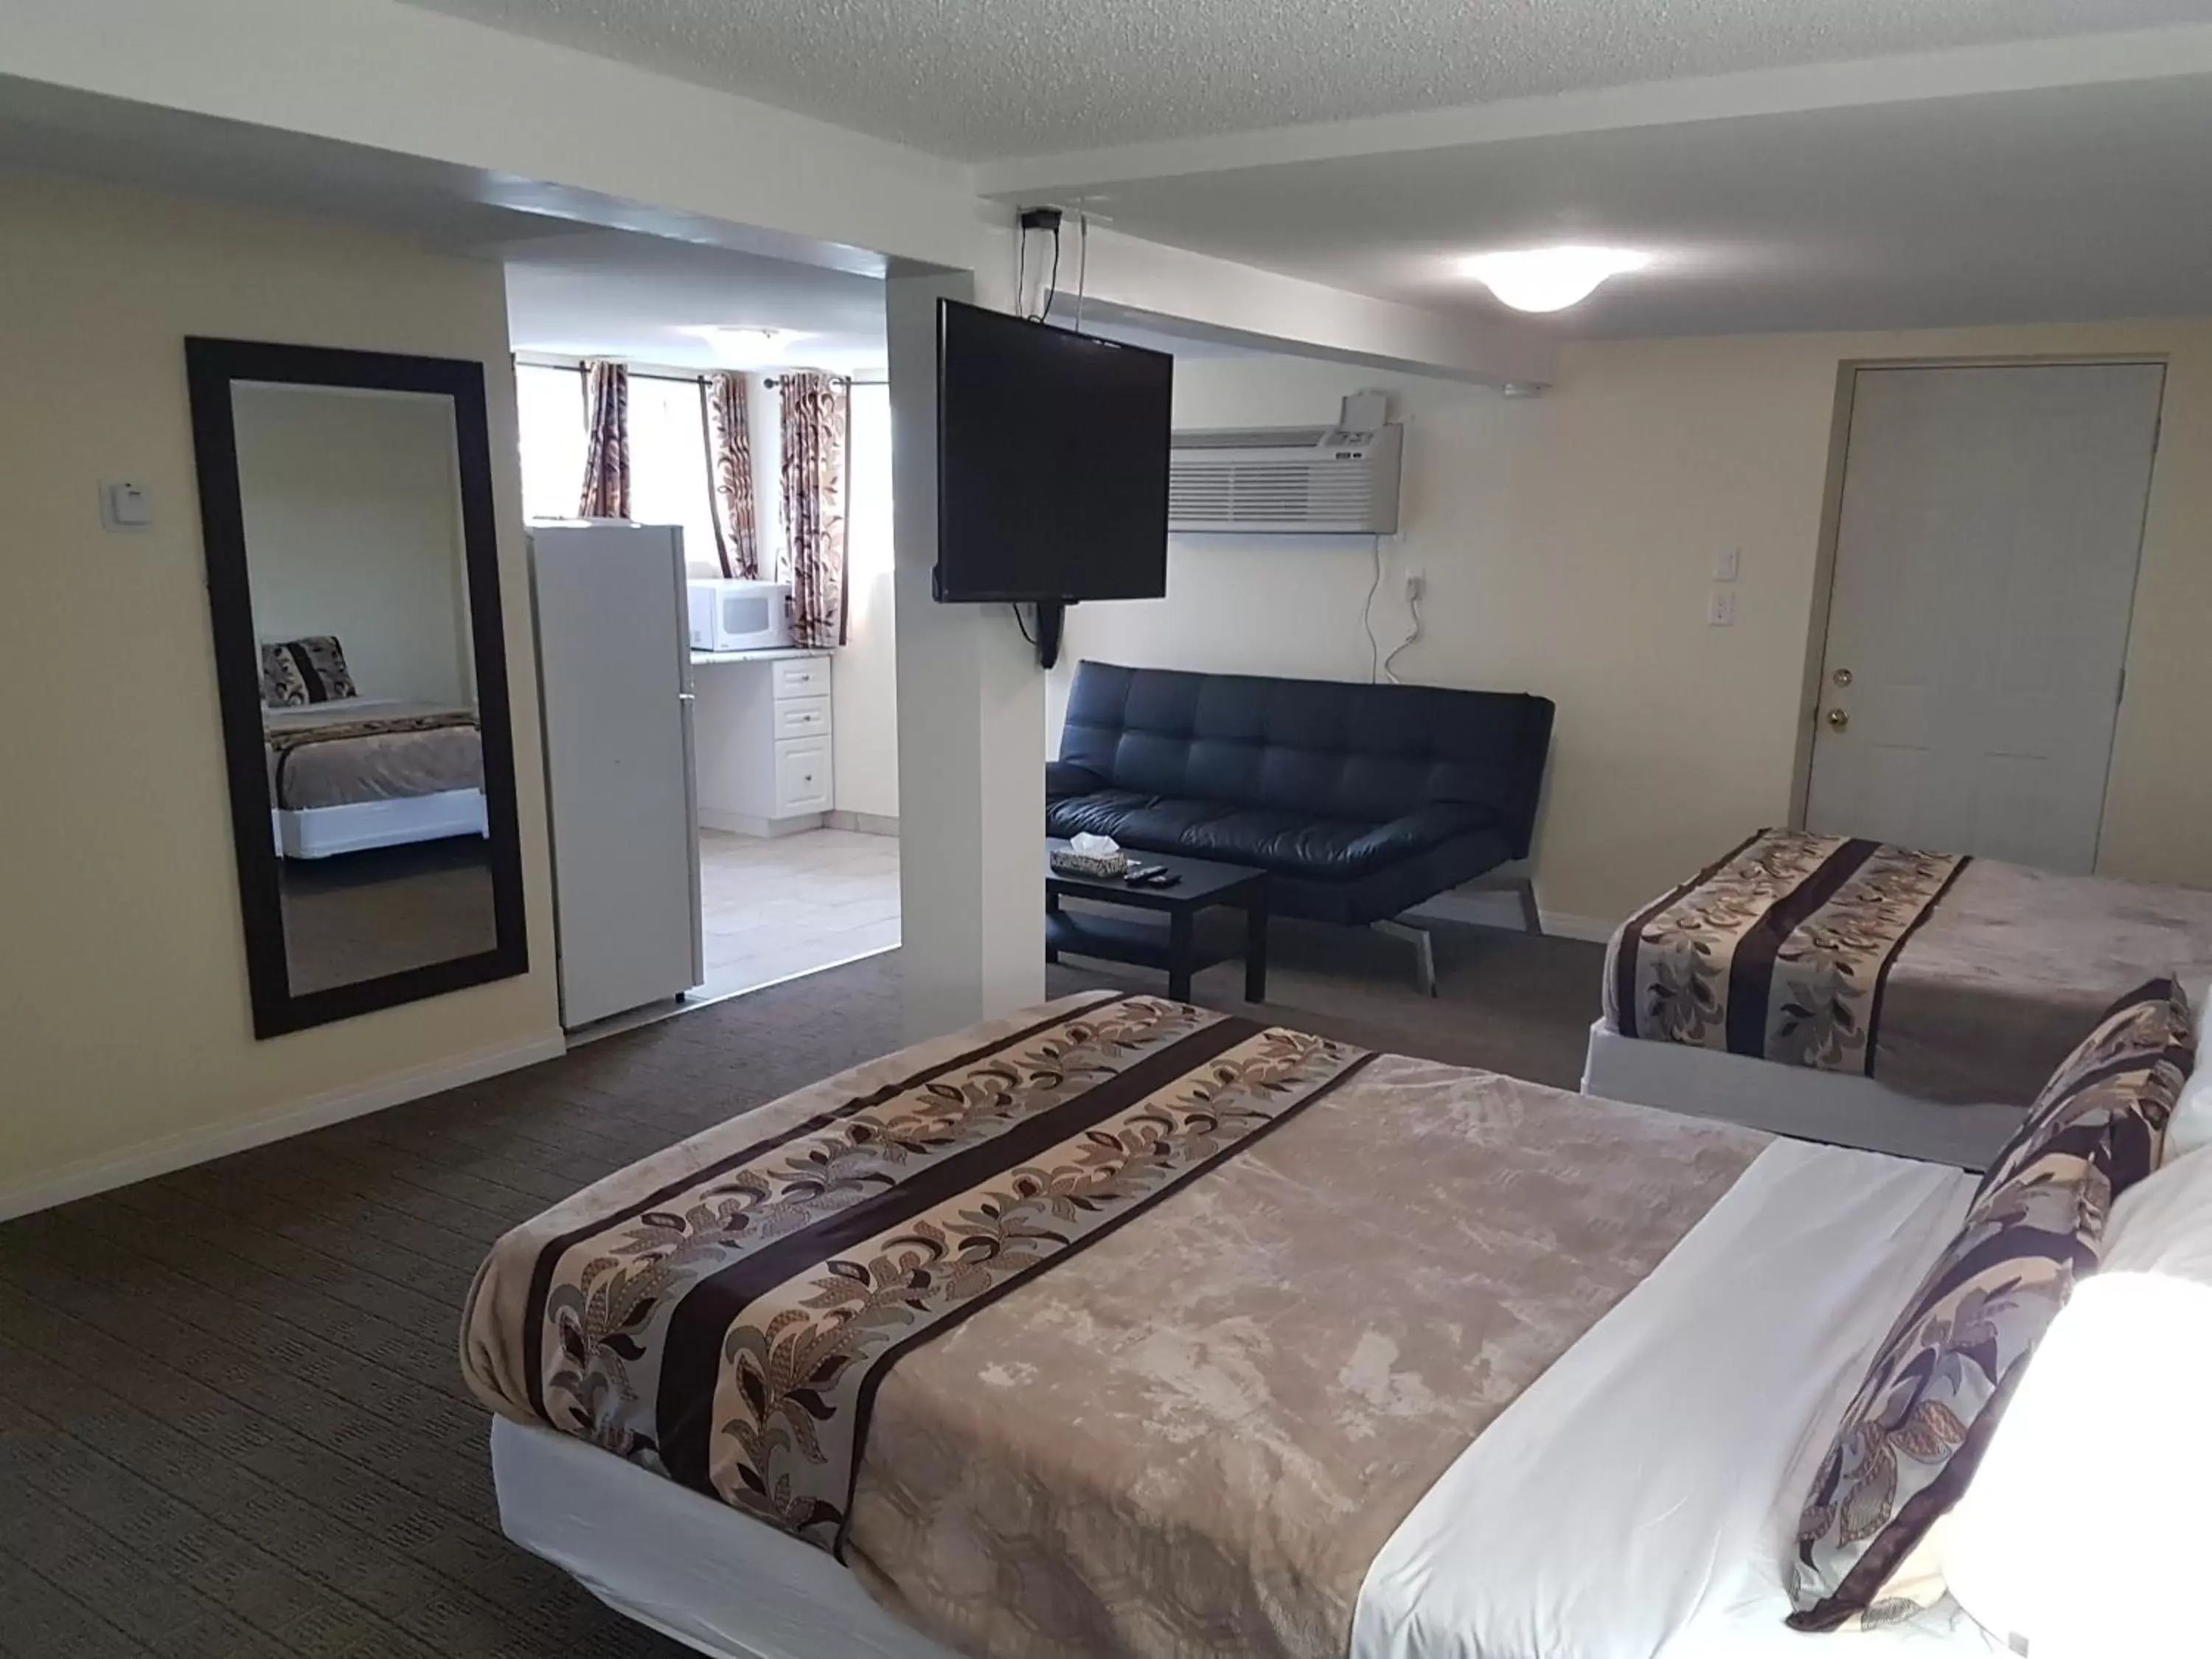 Bed in Parkway Motel & European Lodges